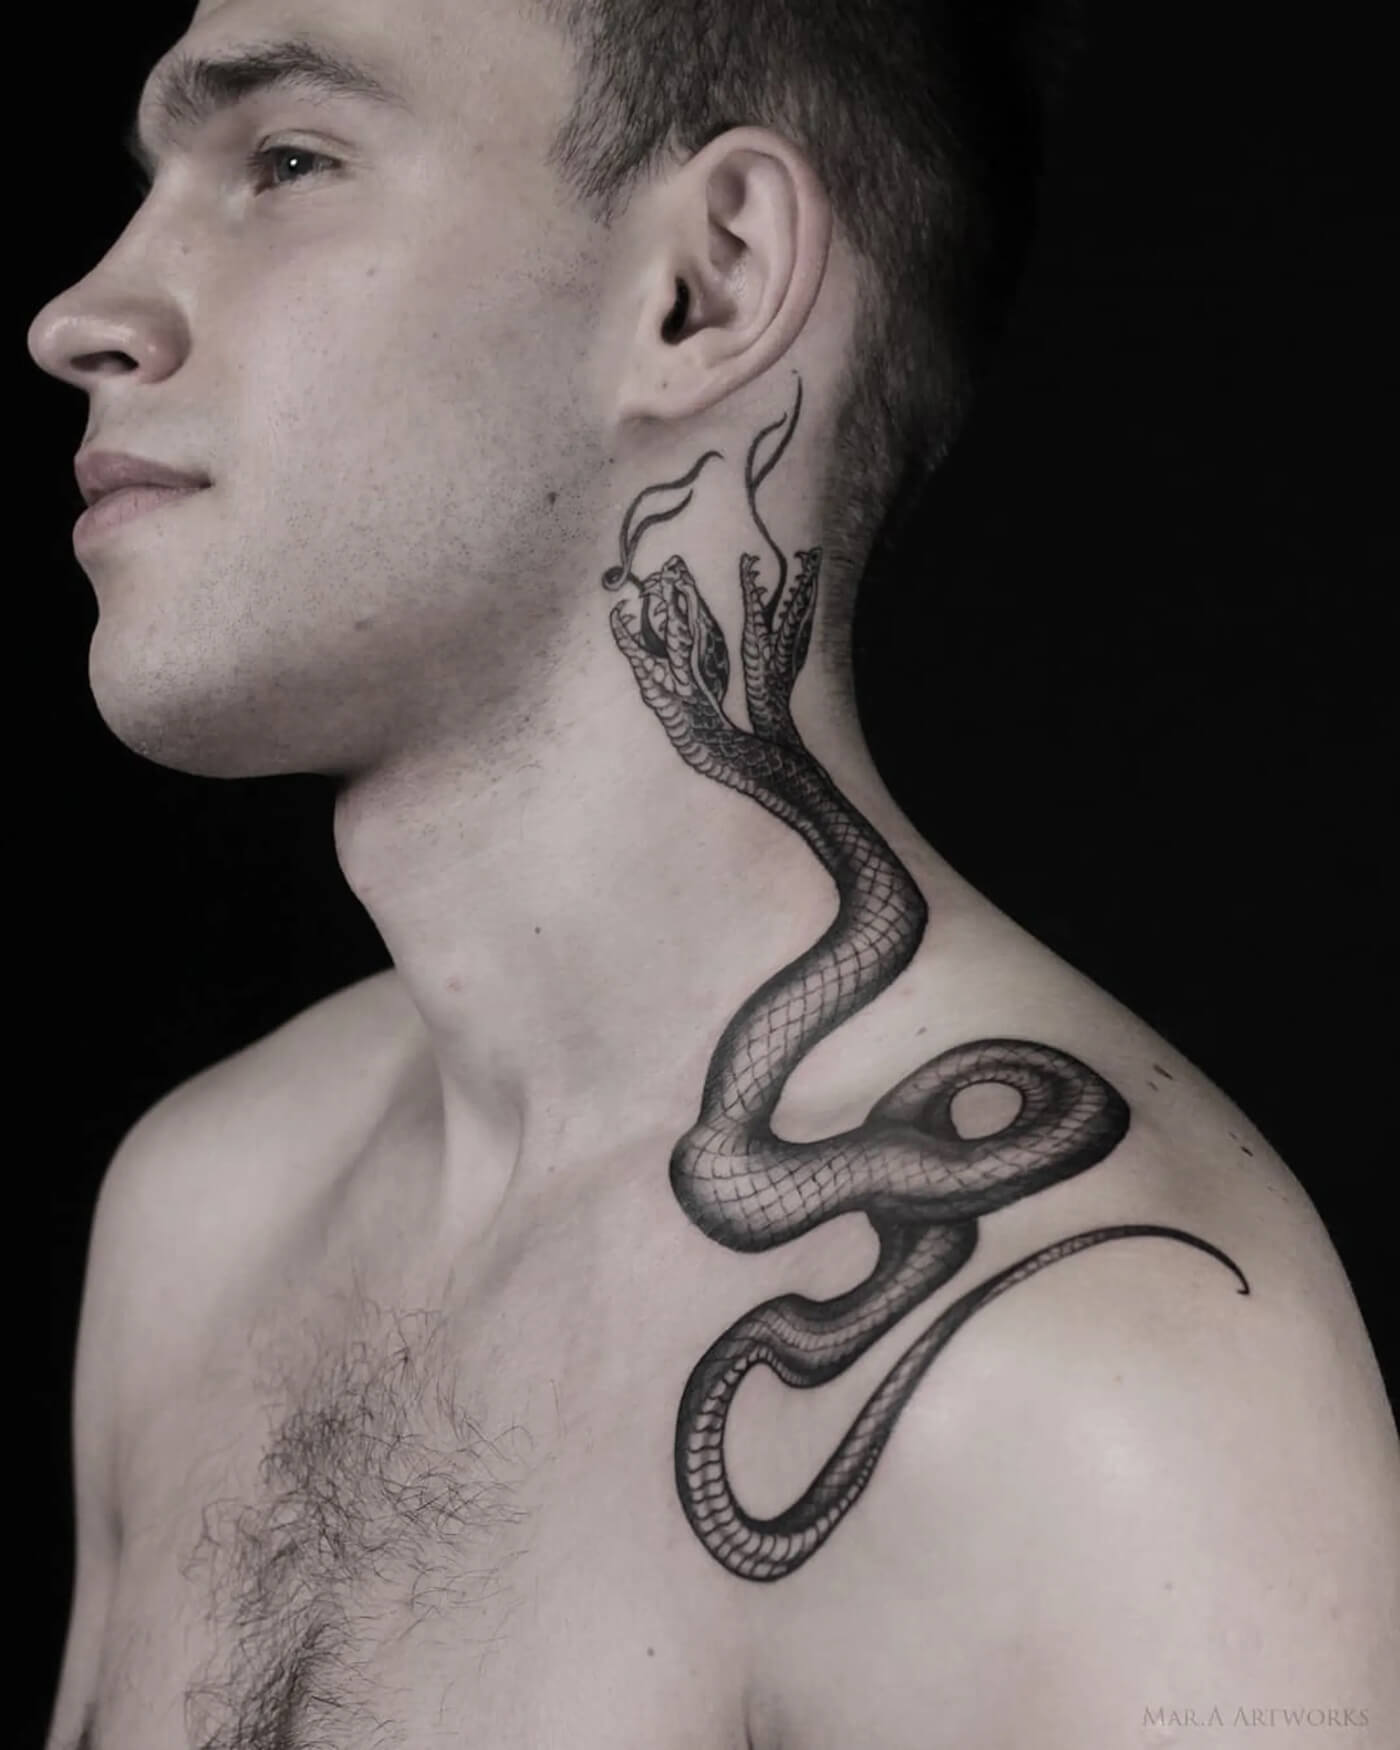 Waterproof, Frictionproof, 7-14 Days Lasting Temporary Tattoo Sticker Of  Snake Wrapped With Tongue Out, Suitable For Both Men And Women, Can Be  Applied To Collarbone And Other Body Parts | SHEIN Malaysia